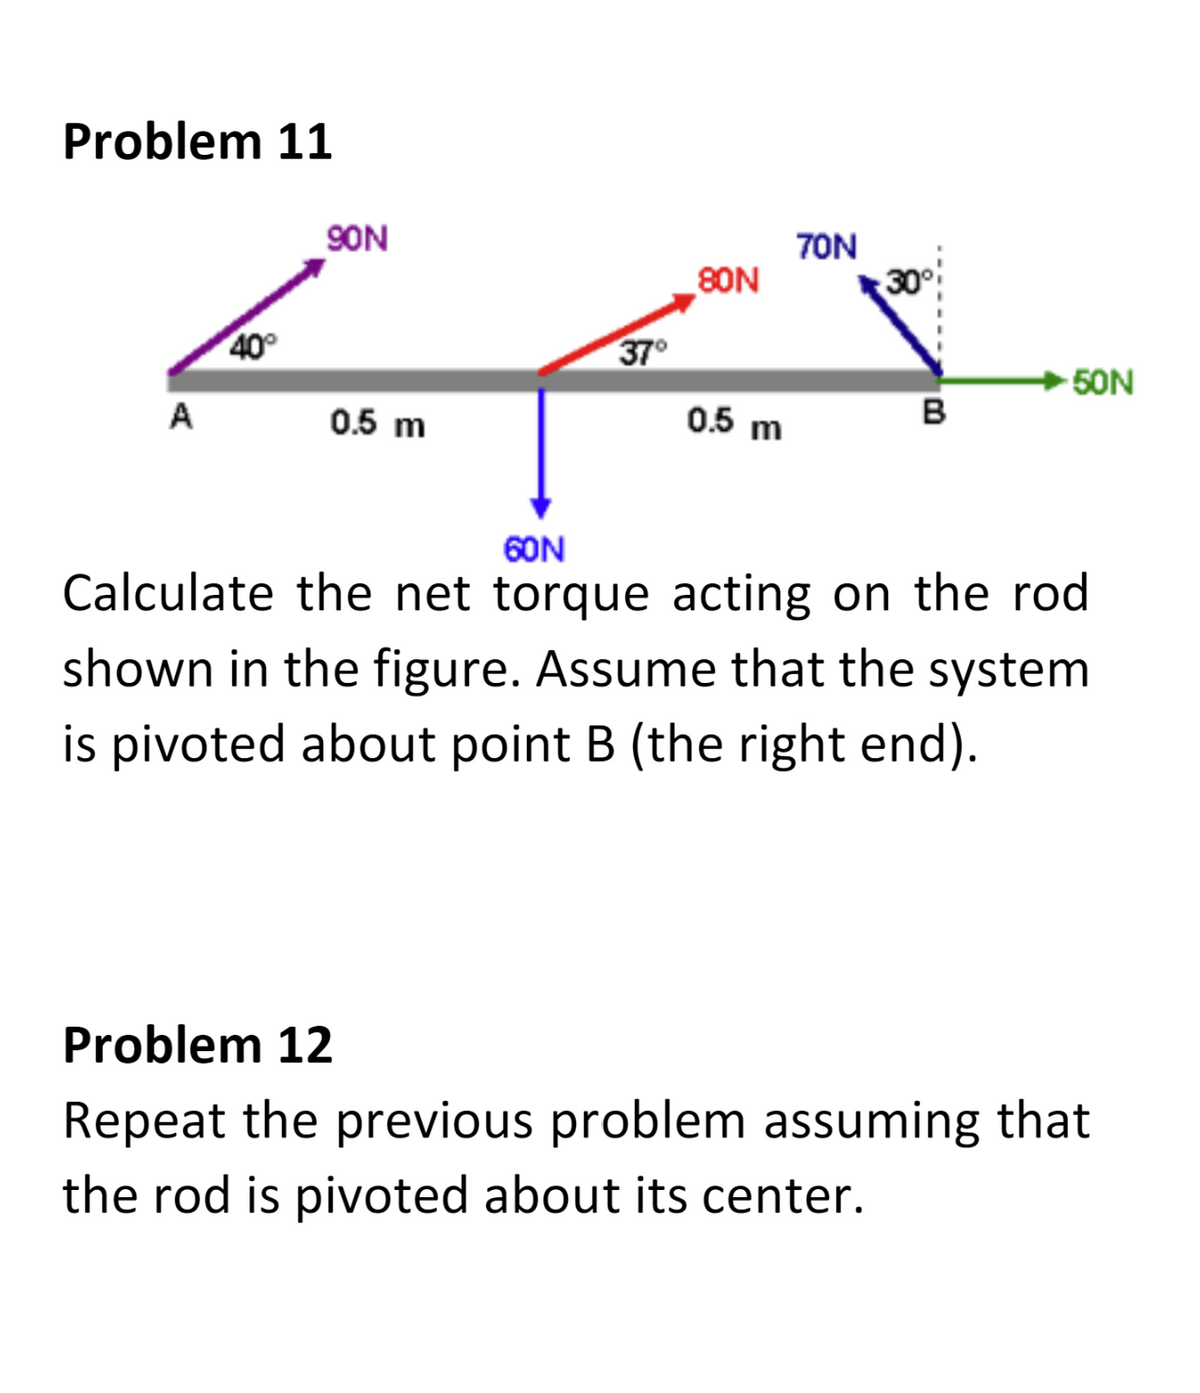 Problem 11
A
40°
90N
0.5 m
37°
80N
0.5 m
70N
30
B
➜50N
60N
Calculate the net torque acting on the rod
shown in the figure. Assume that the system
is pivoted about point B (the right end).
Problem 12
Repeat the previous problem assuming that
the rod is pivoted about its center.